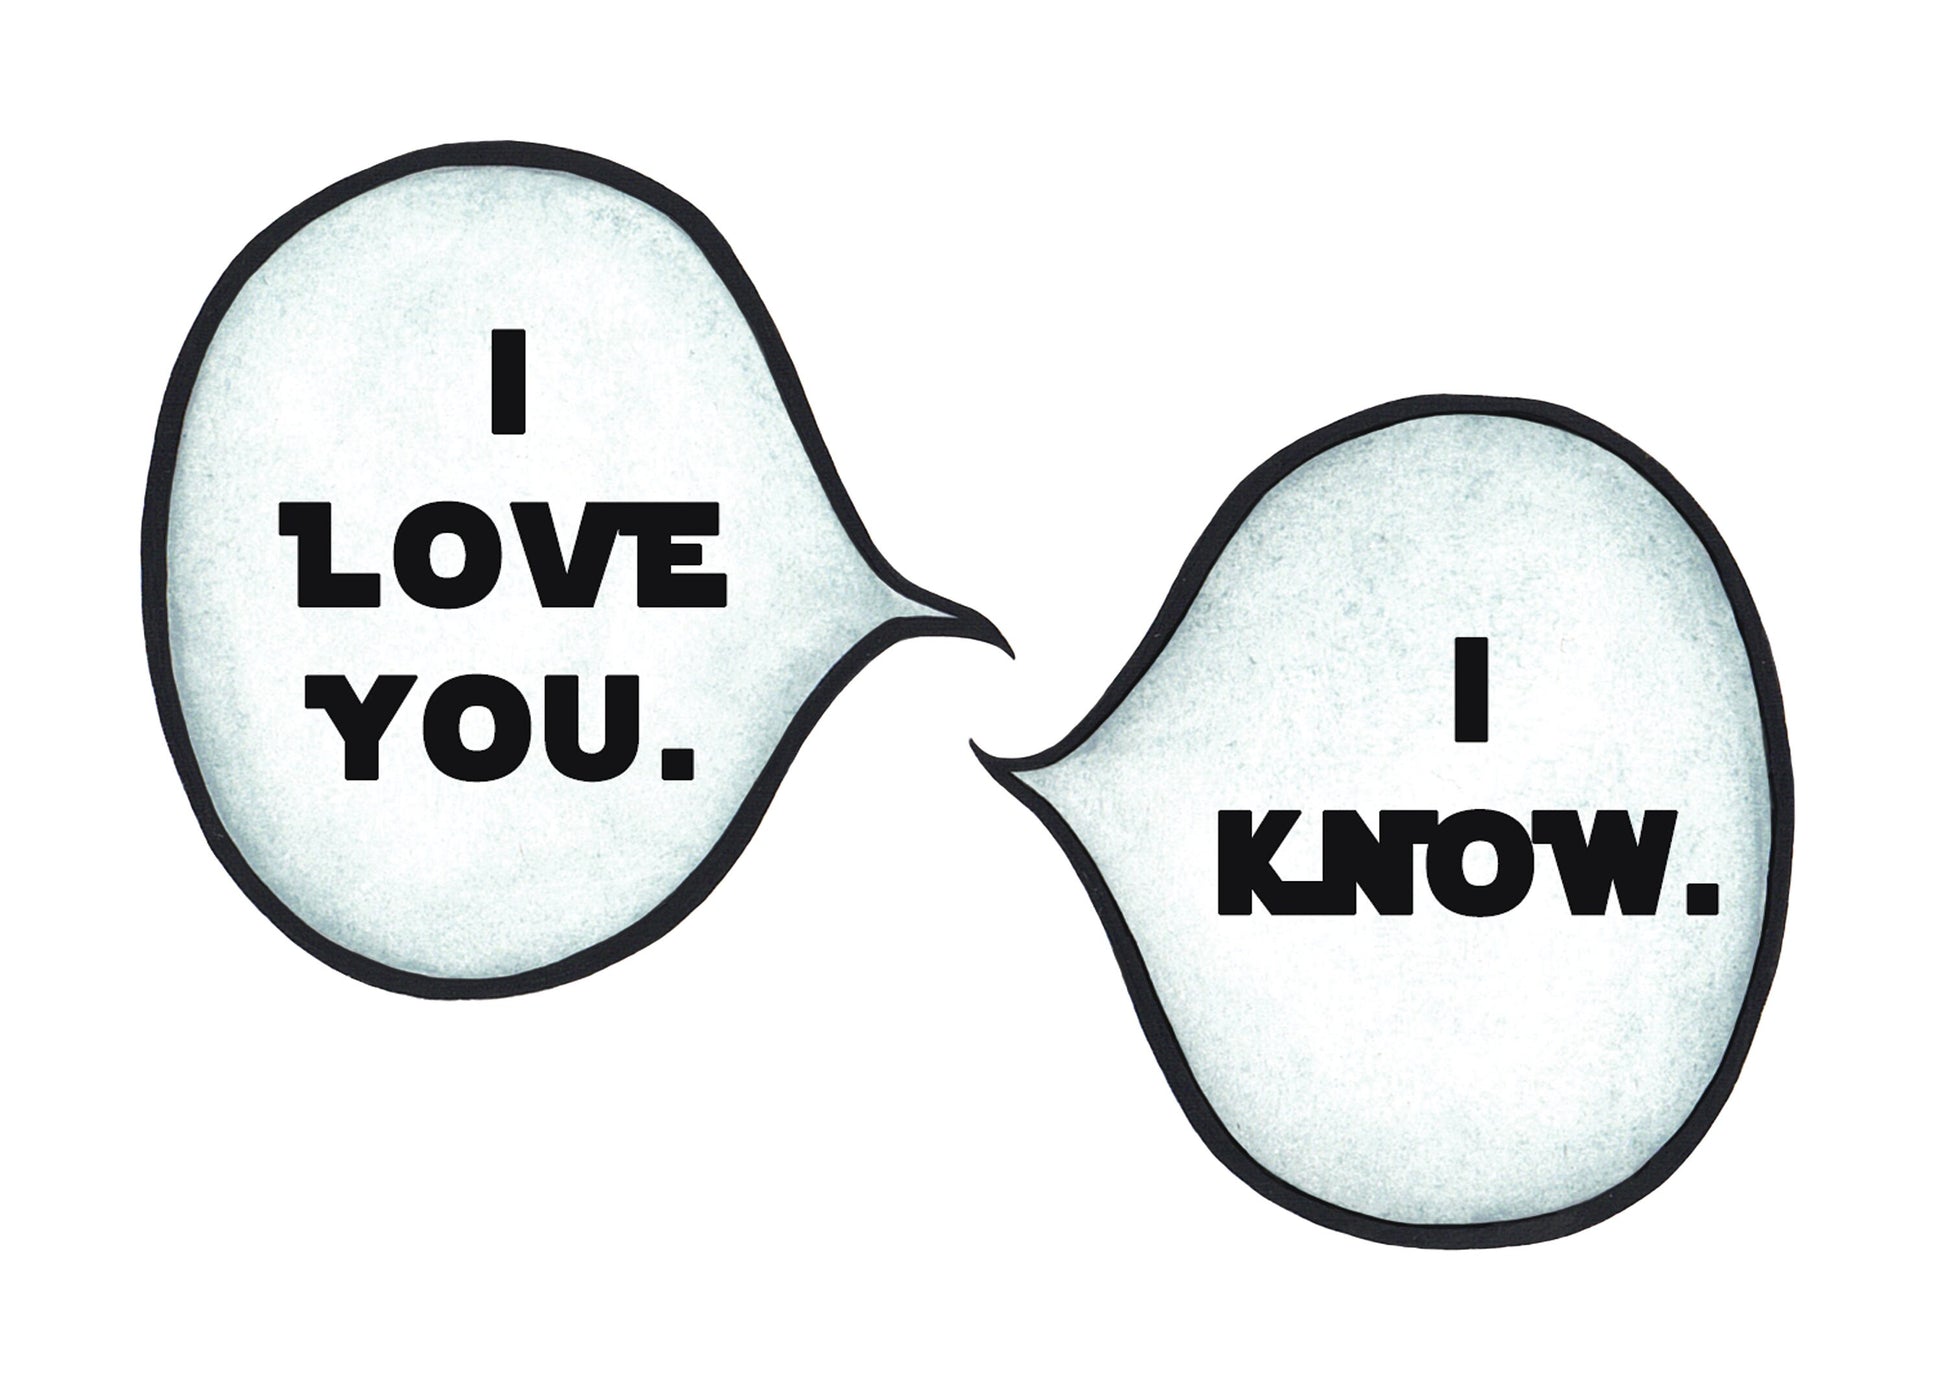 I Love You - I Know|Star Wars|Hand Painted Illustration|Geek